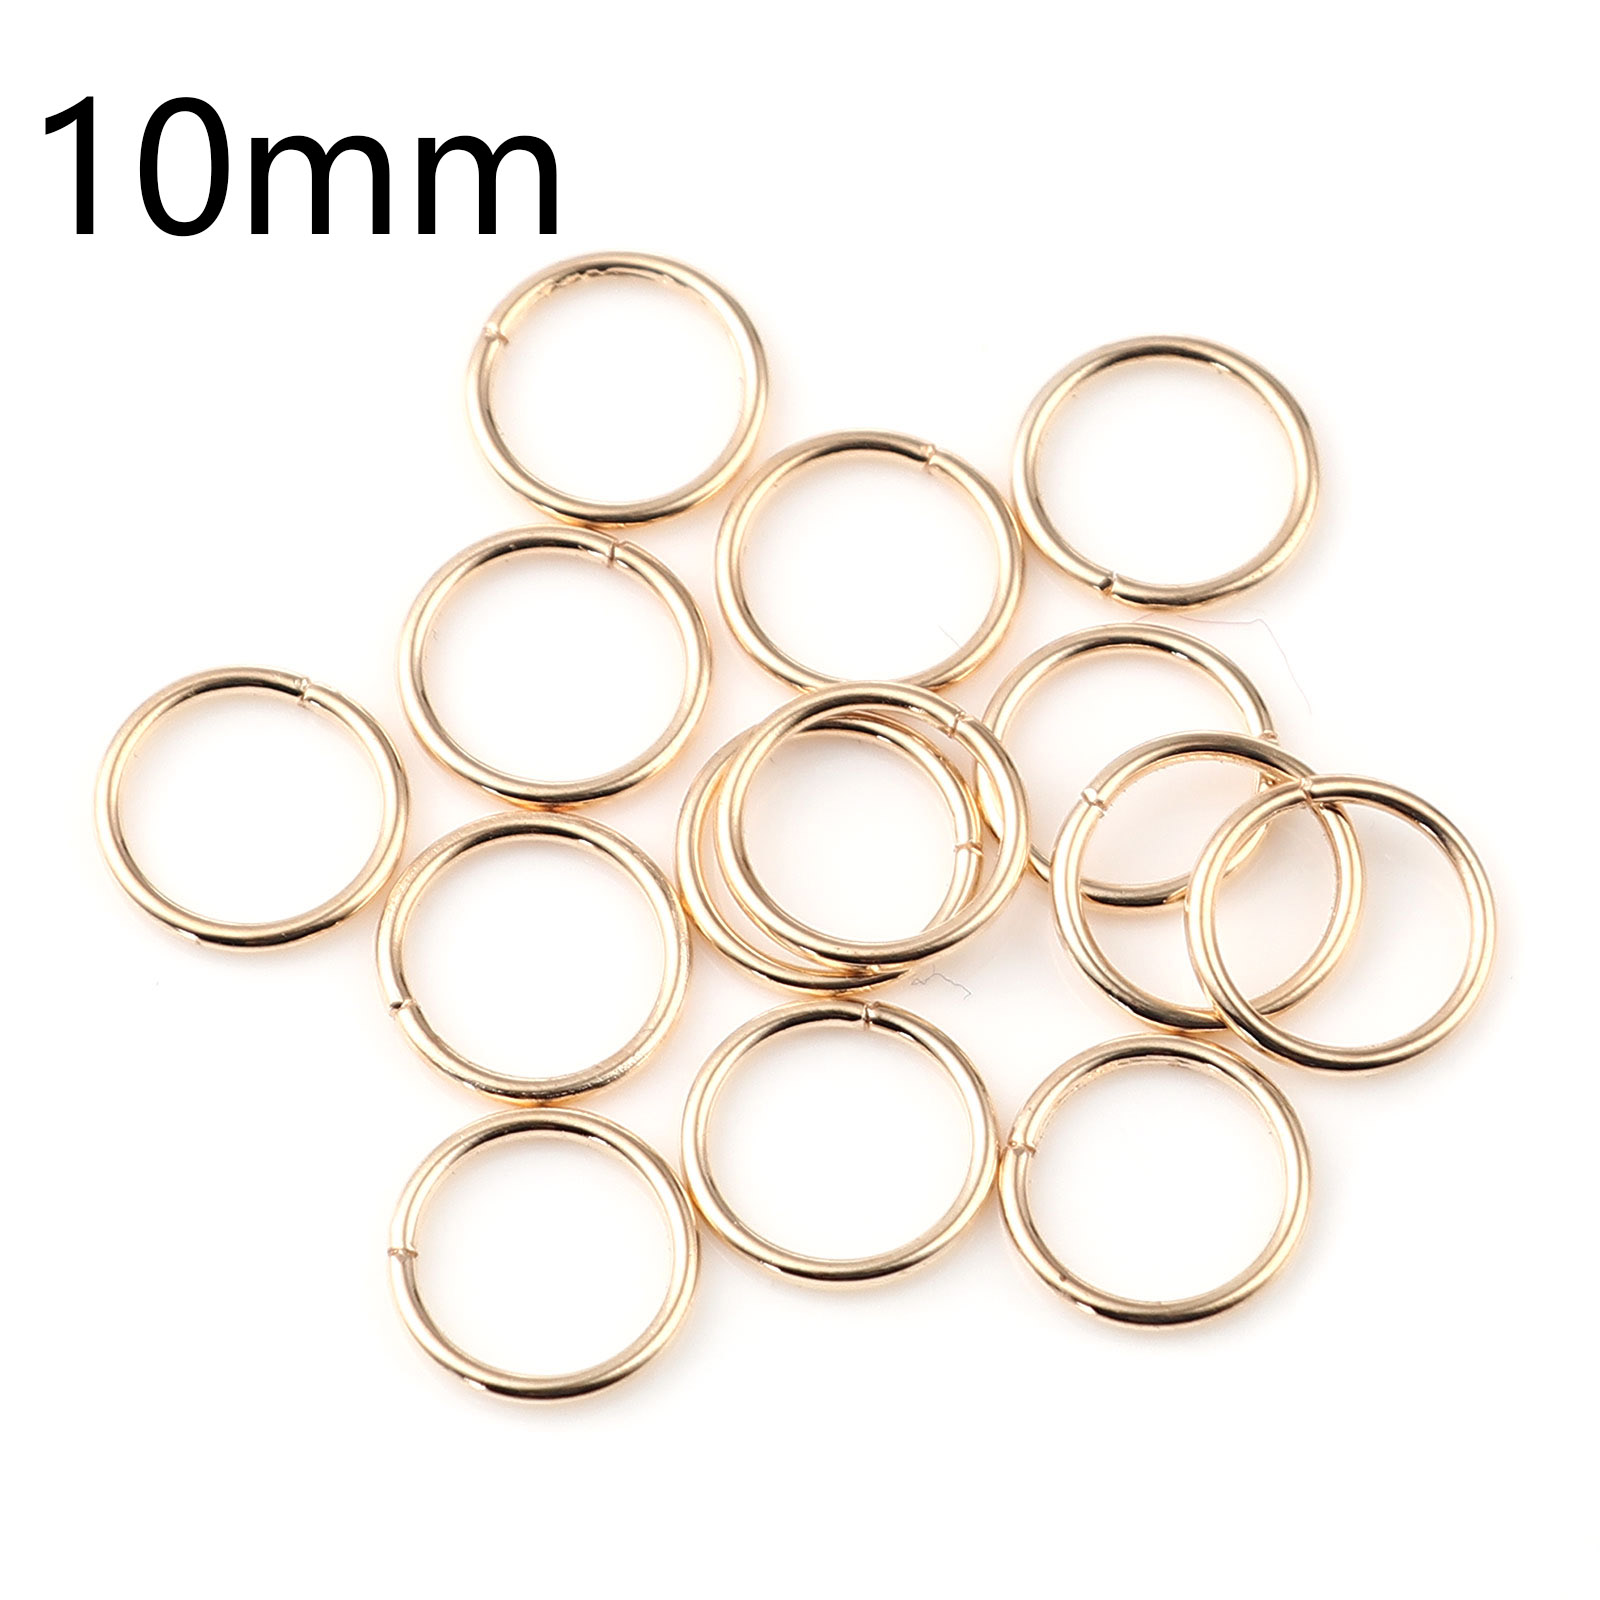 Picture of 1mm Iron Based Alloy Open Jump Rings Findings Circle Ring KC Gold Plated 10mm Dia, 200 PCs